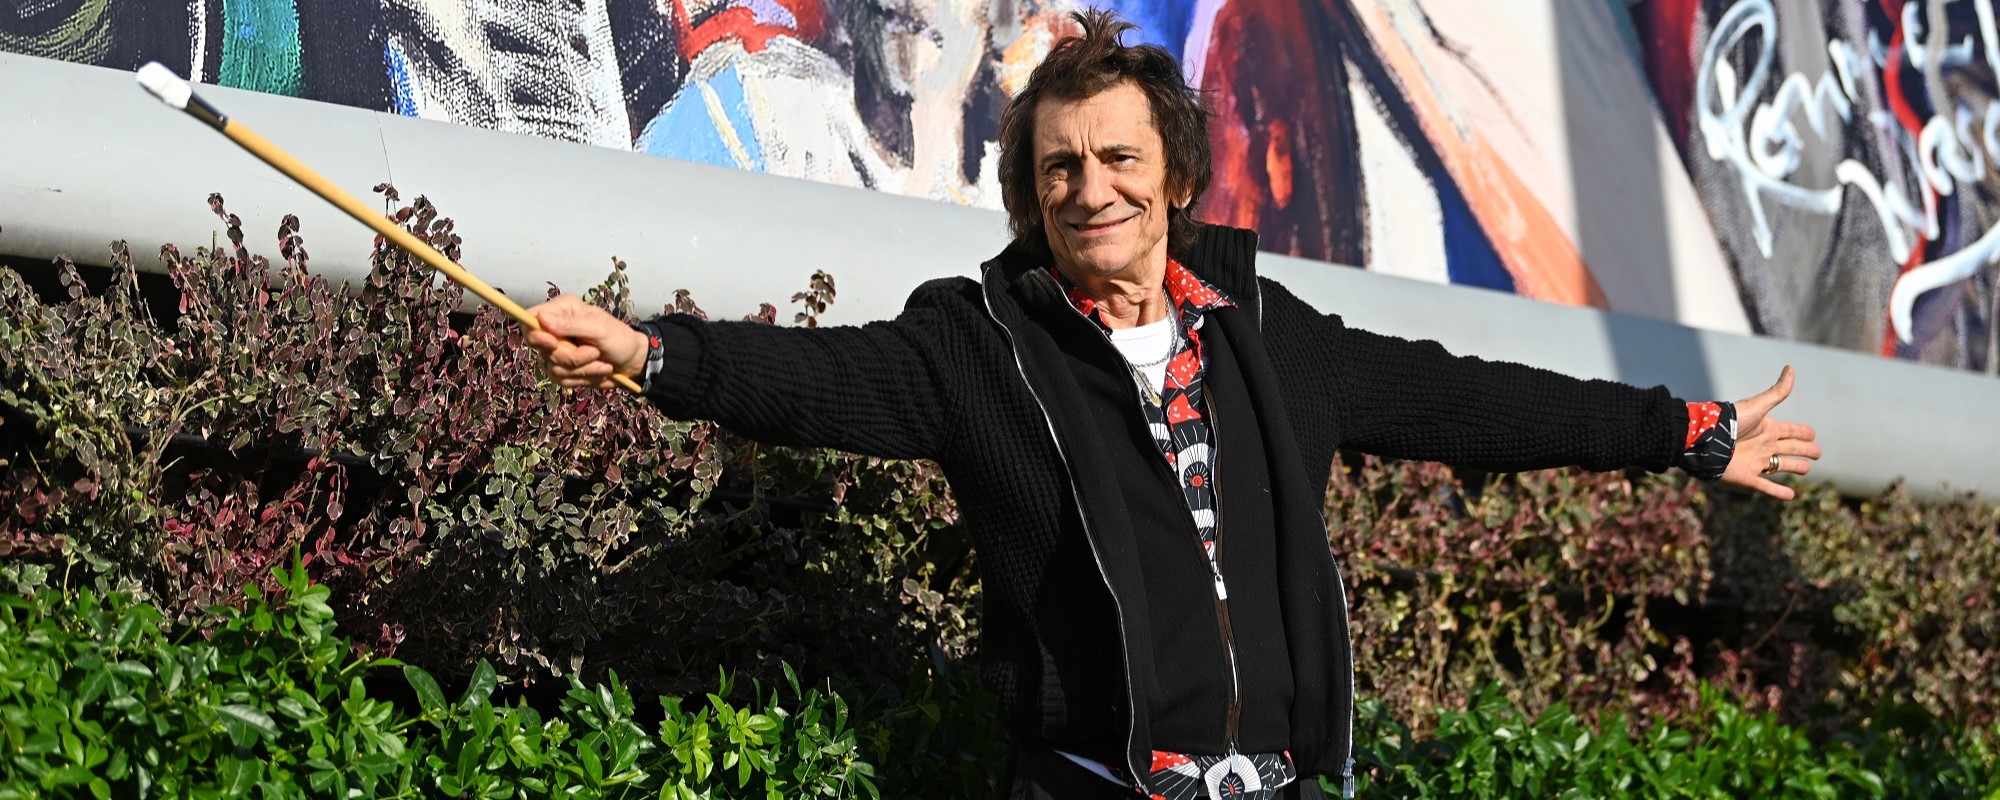 The Rolling Stones’ Ronnie Wood Selling Art-Print Collection to Benefit Eric Clapton-Founded Crossroads Rehab Center